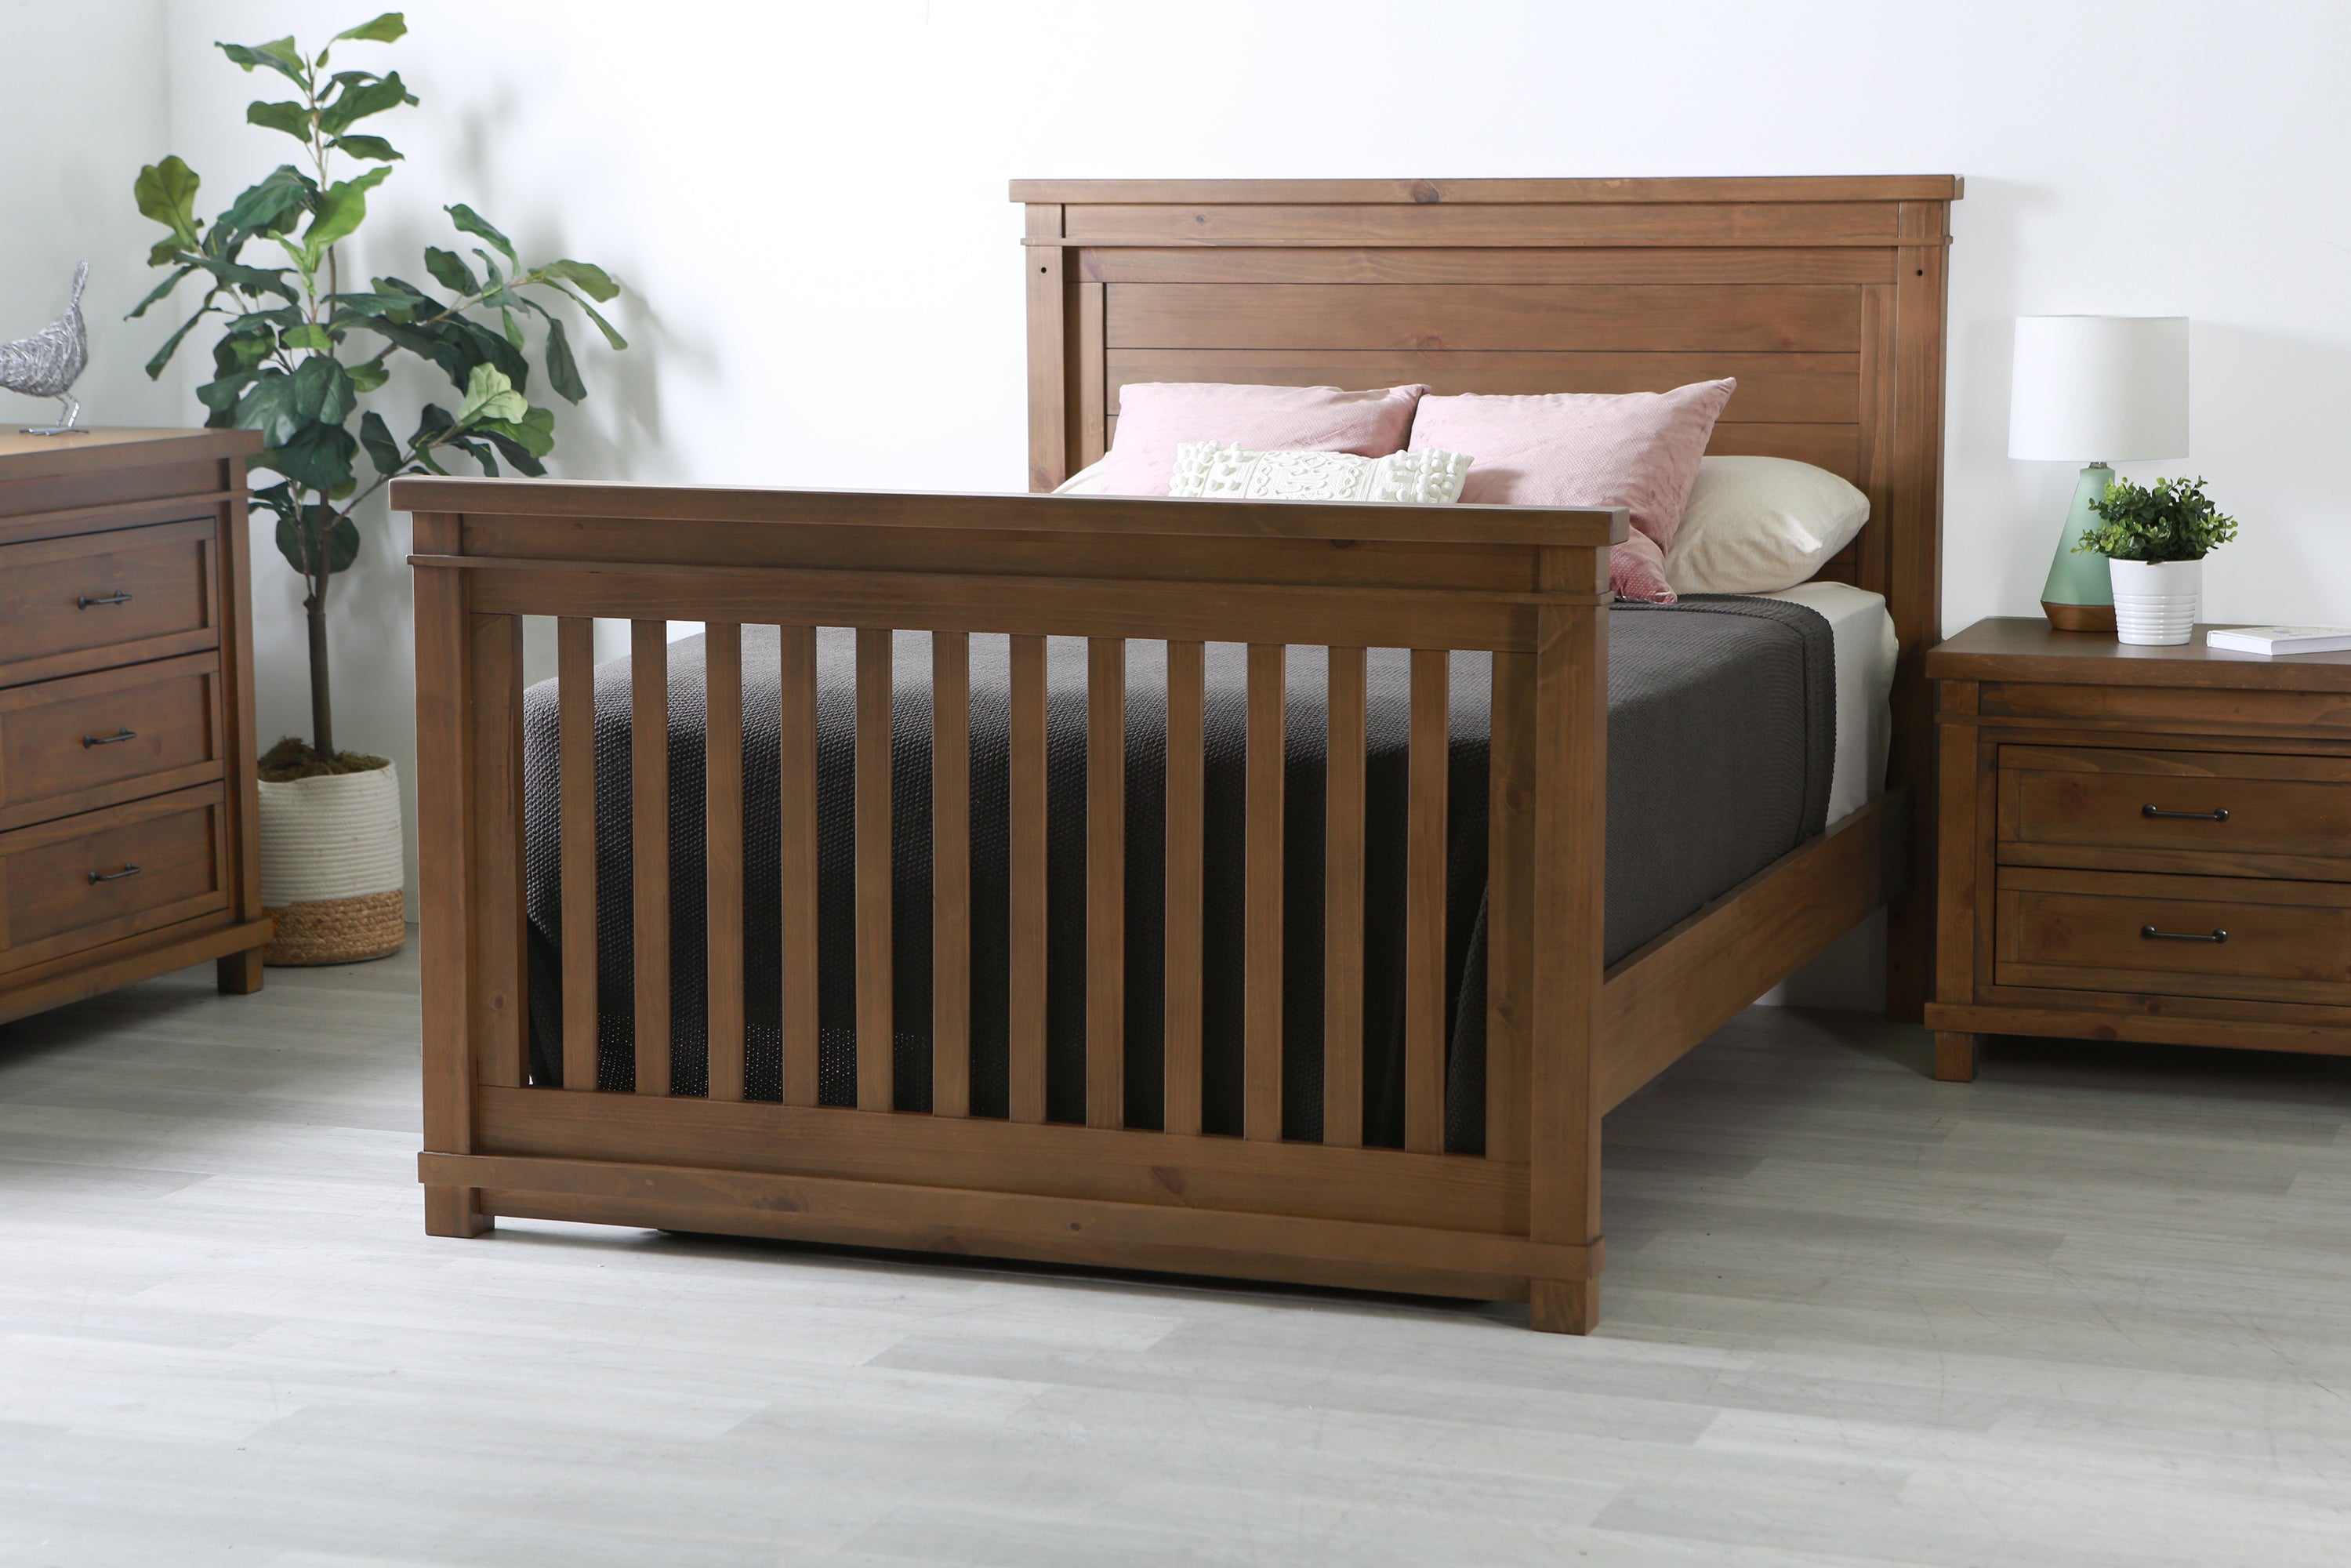 Rowan crib shown converted to full size bed